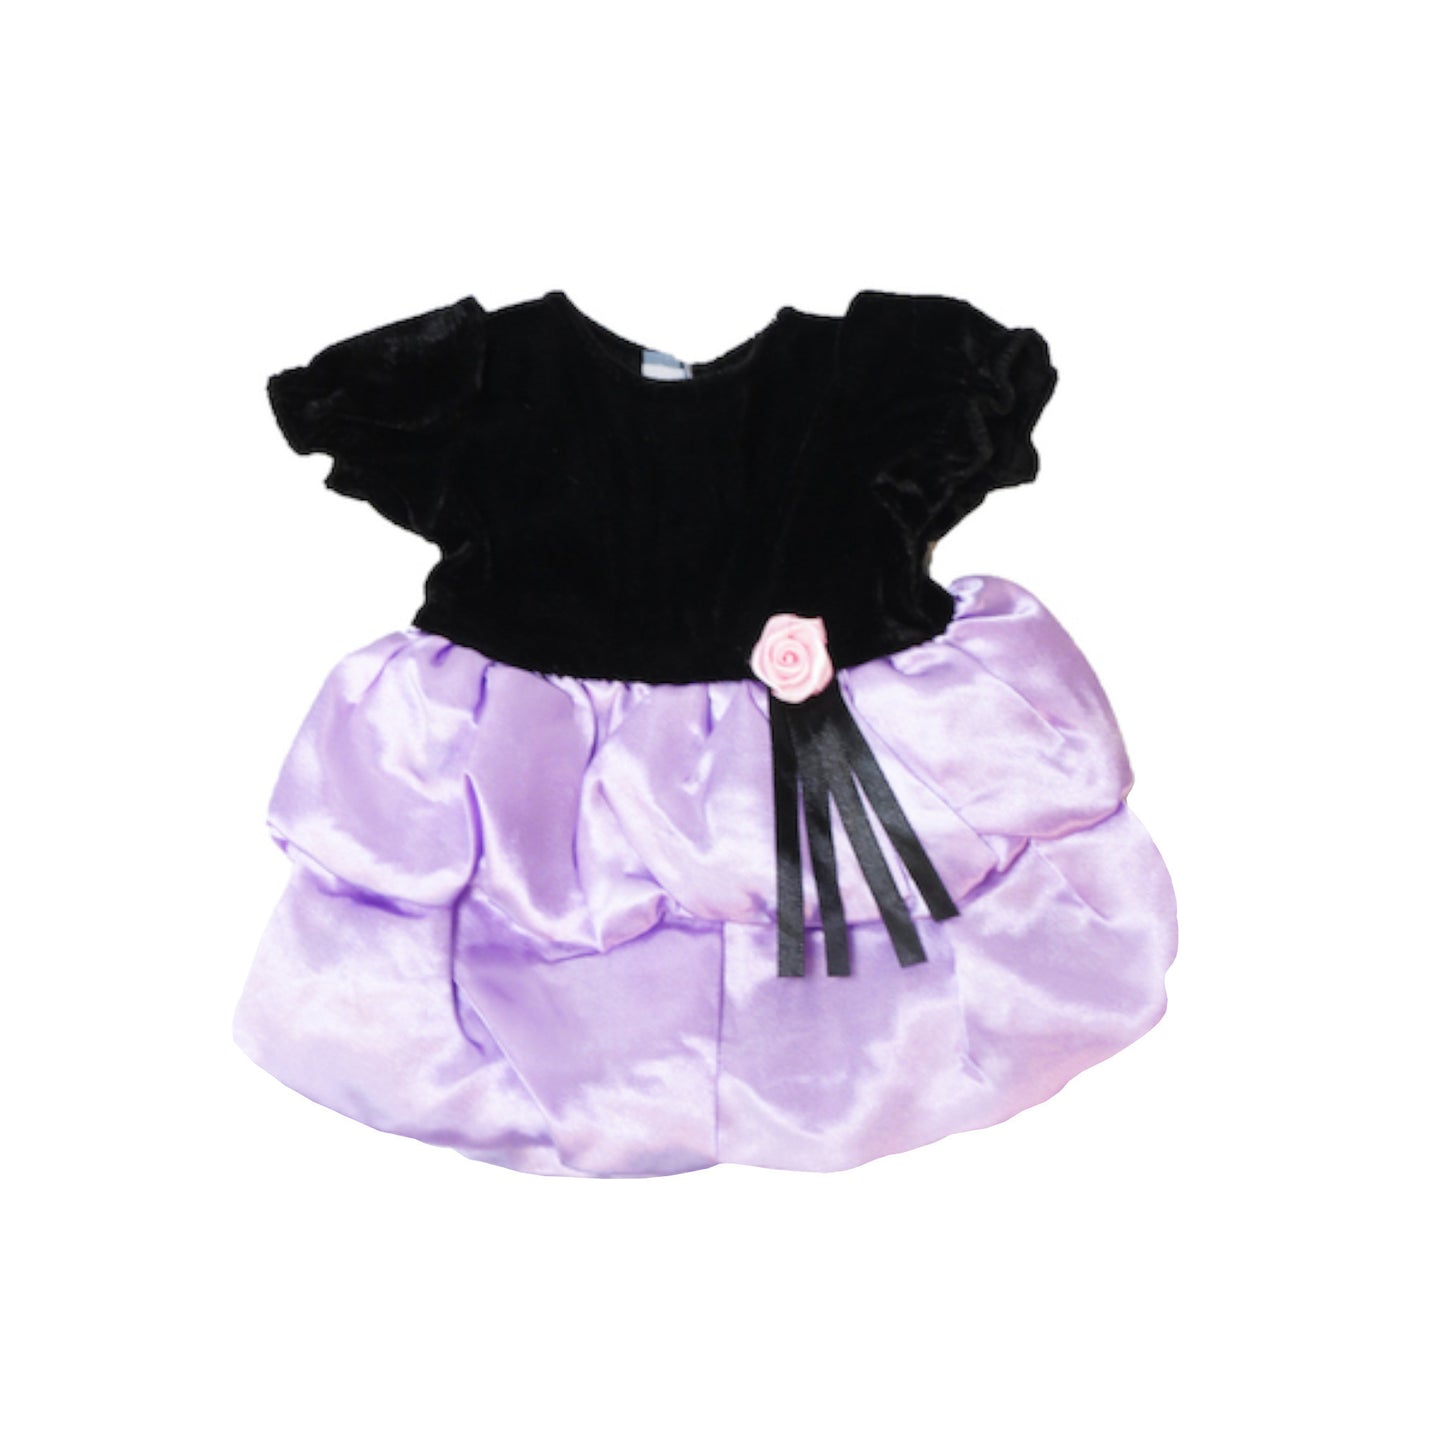 Black and Purple Dress for 18-inch dolls Flat